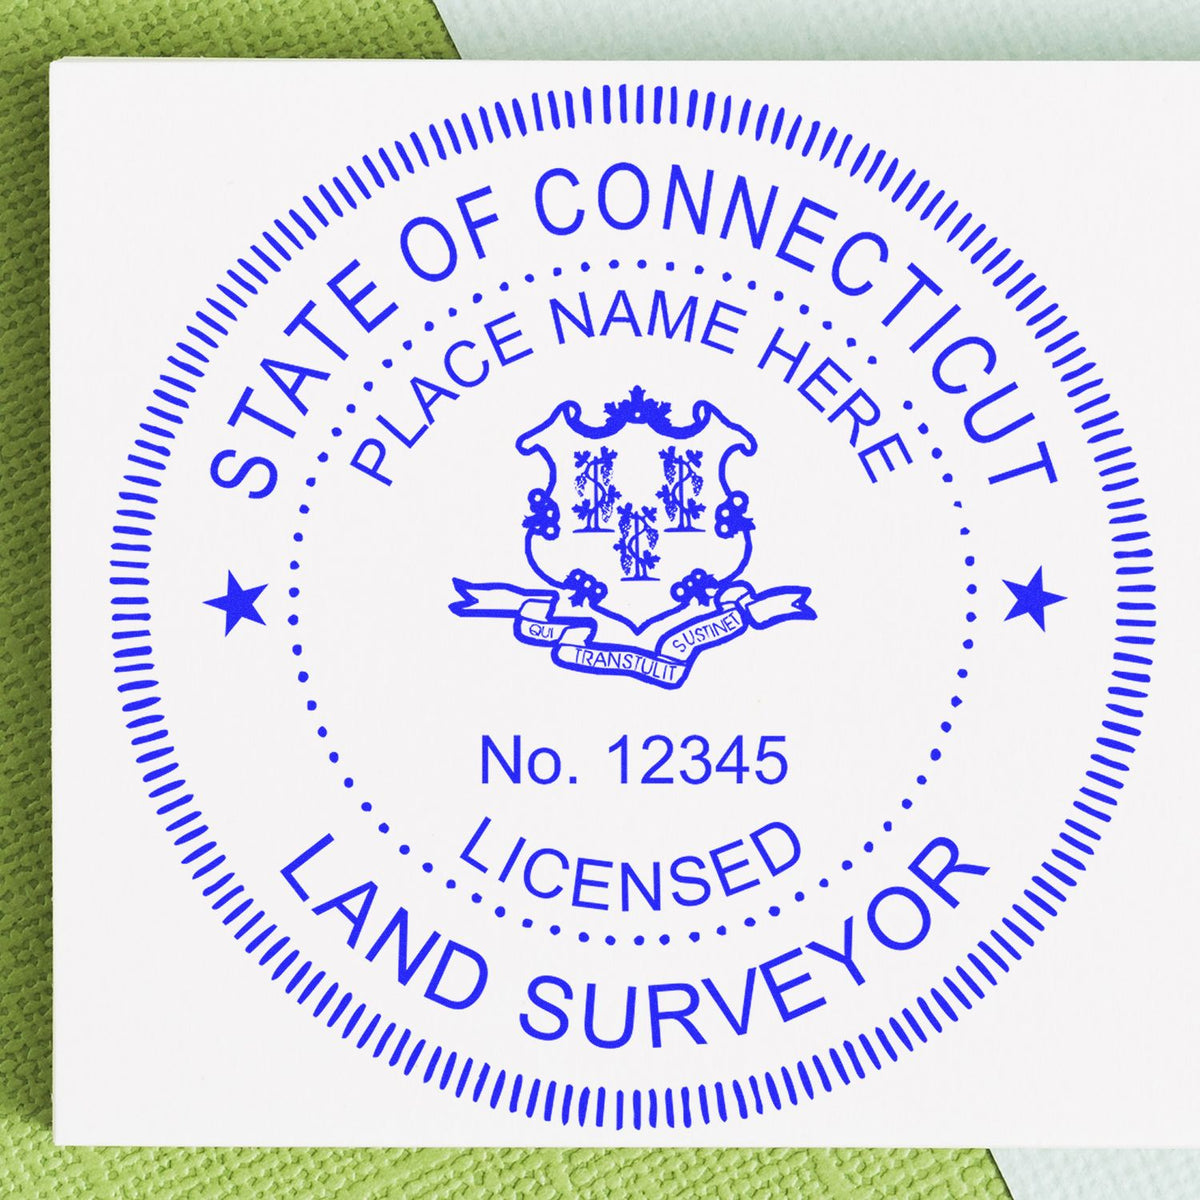 Connecticut Land Surveyor Seal Stamp In Use Photo